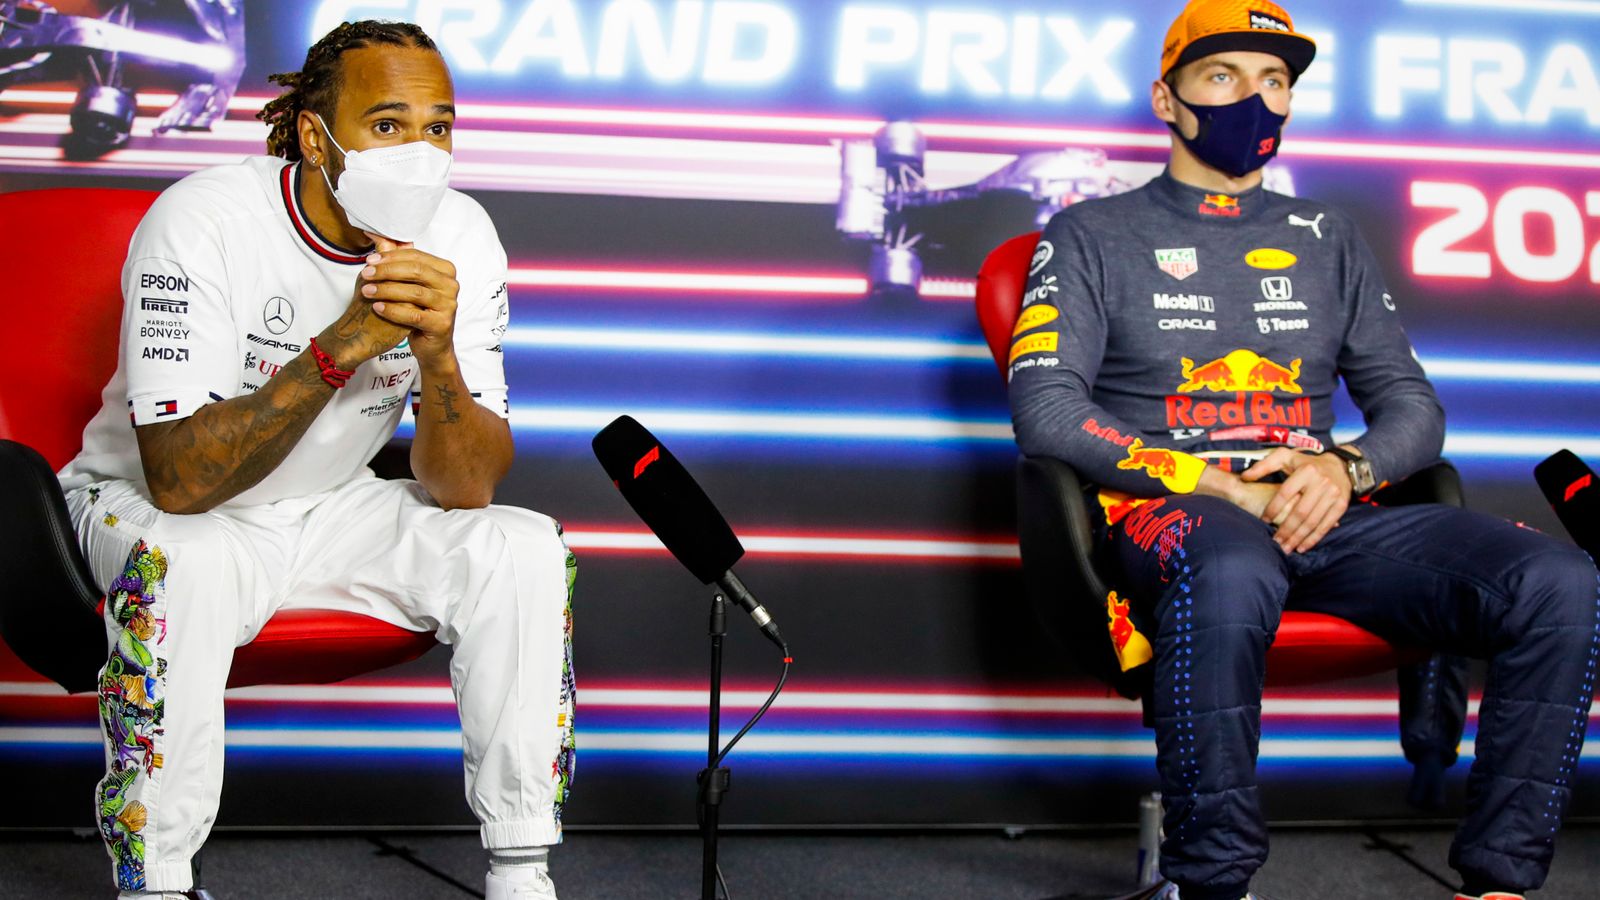 Mercedes to assess what went wrong in French Grand Prix after losing out on win to Red Bull